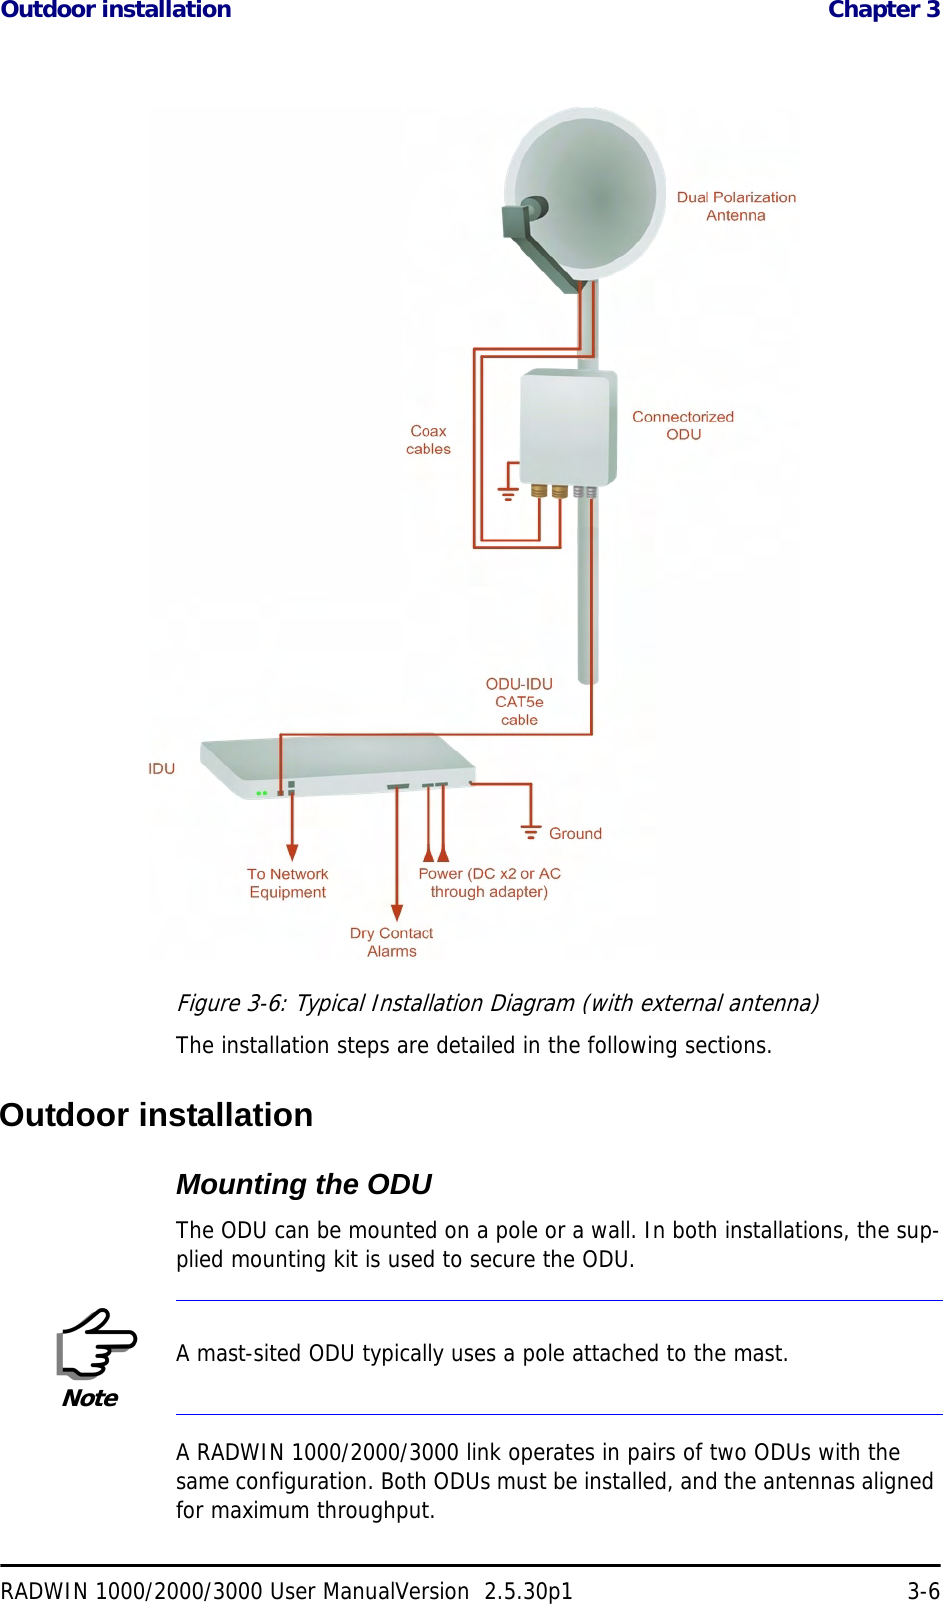 Outdoor installation  Chapter 3RADWIN 1000/2000/3000 User ManualVersion  2.5.30p1 3-6Figure 3-6: Typical Installation Diagram (with external antenna)The installation steps are detailed in the following sections.Outdoor installationMounting the ODUThe ODU can be mounted on a pole or a wall. In both installations, the sup-plied mounting kit is used to secure the ODU.A RADWIN 1000/2000/3000 link operates in pairs of two ODUs with the same configuration. Both ODUs must be installed, and the antennas aligned for maximum throughput.NoteA mast-sited ODU typically uses a pole attached to the mast.